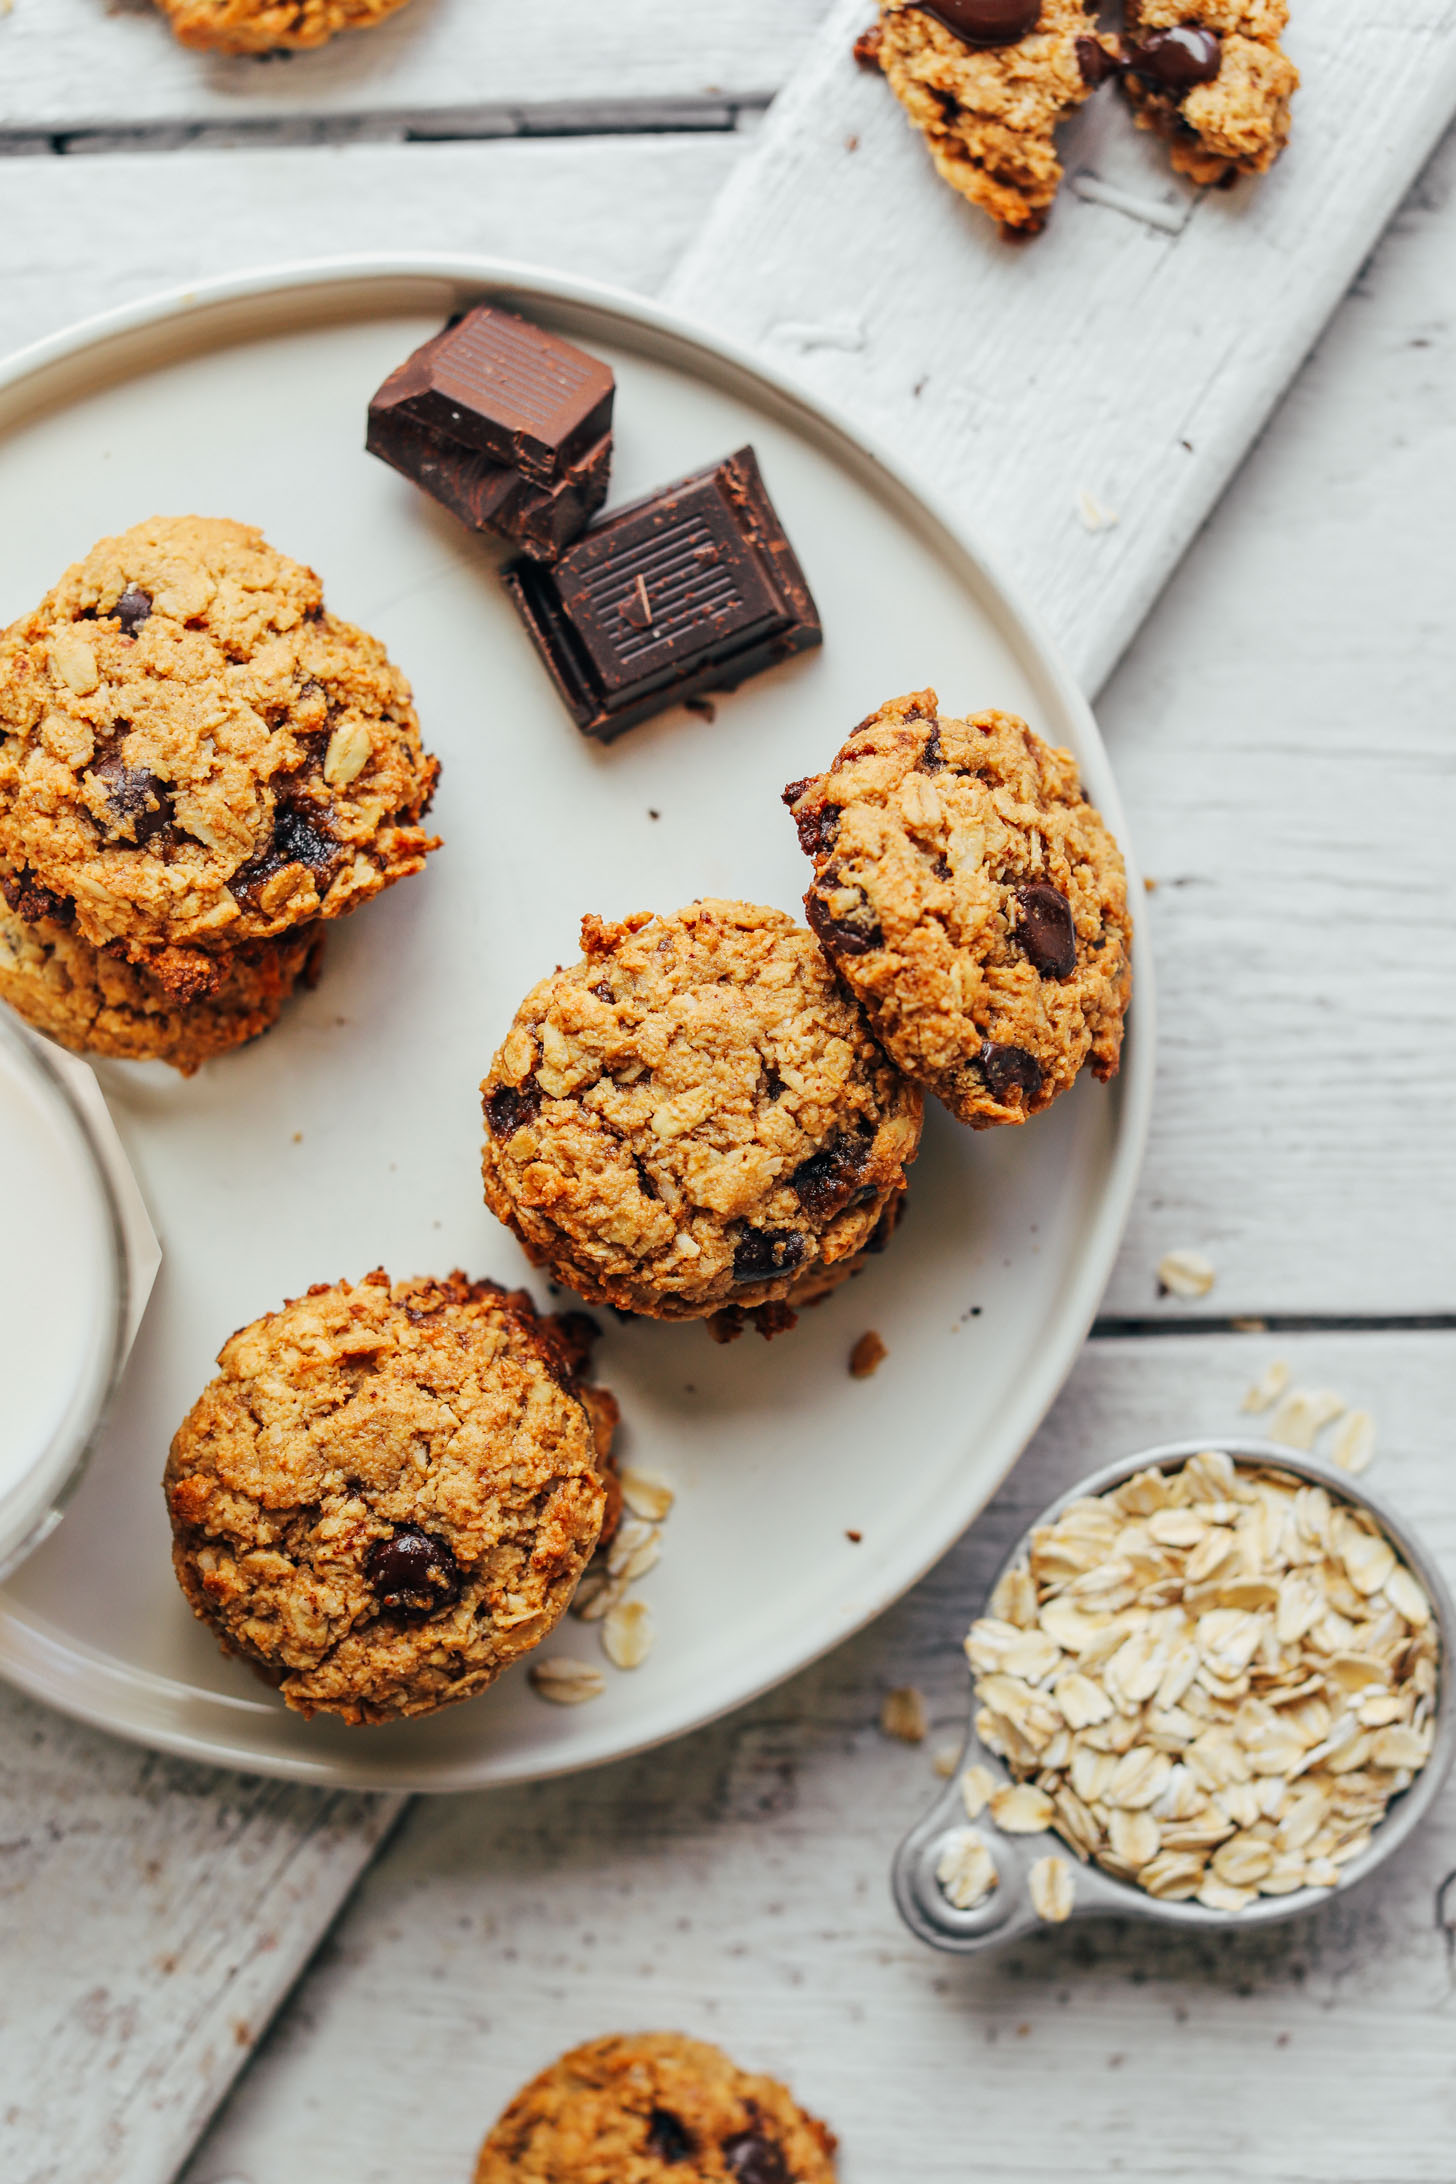 A plate of Healthy Oatmeal Chocolate Chip Cookies